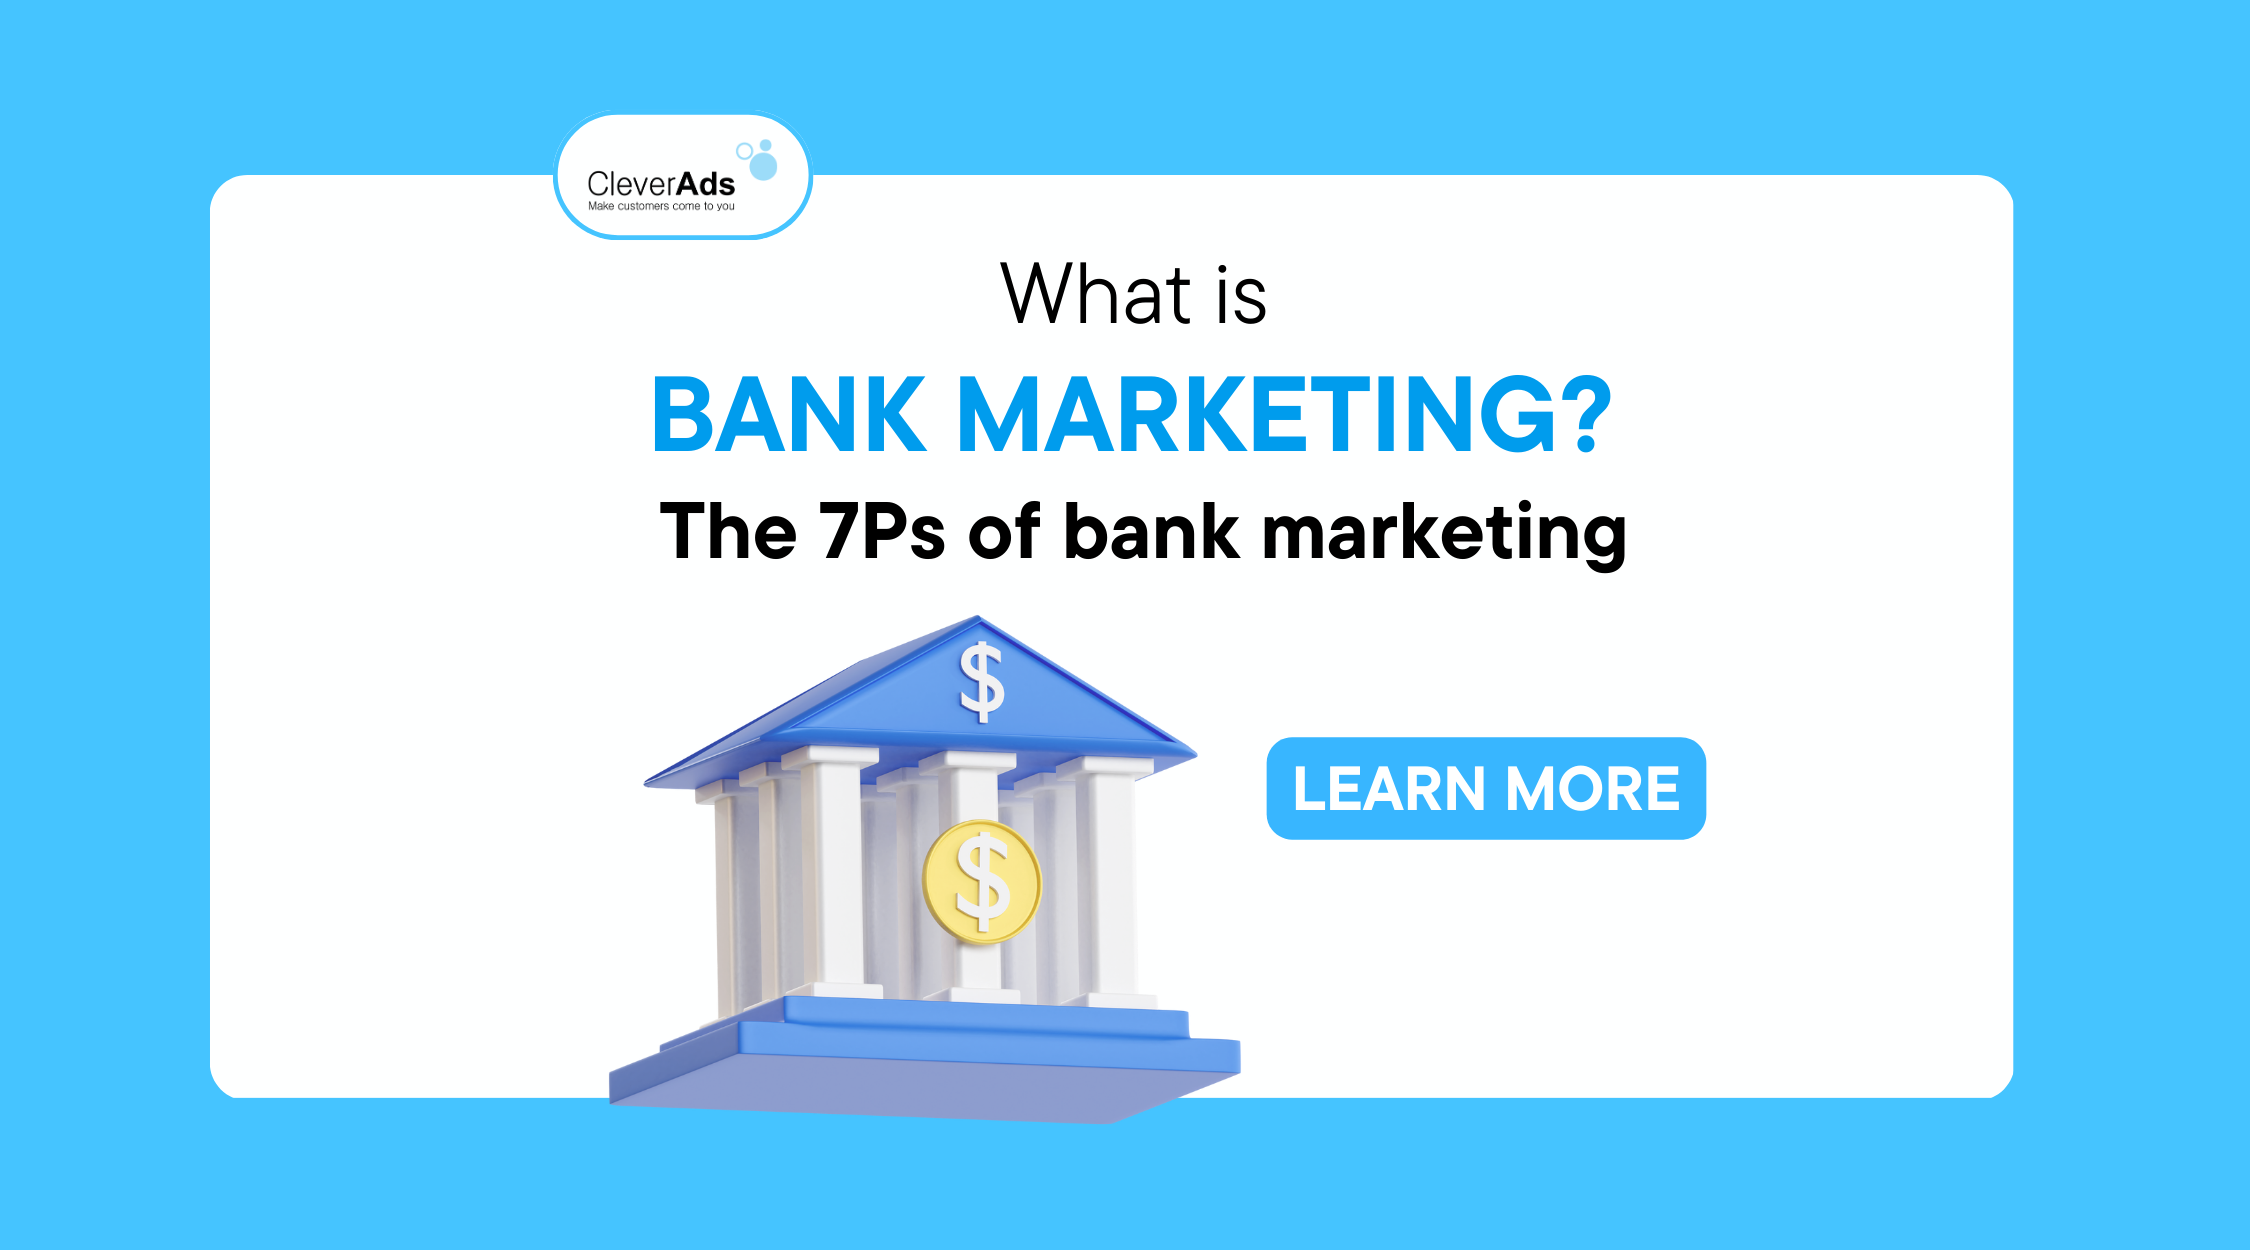 What is bank marketing? The 7Ps of bank marketing